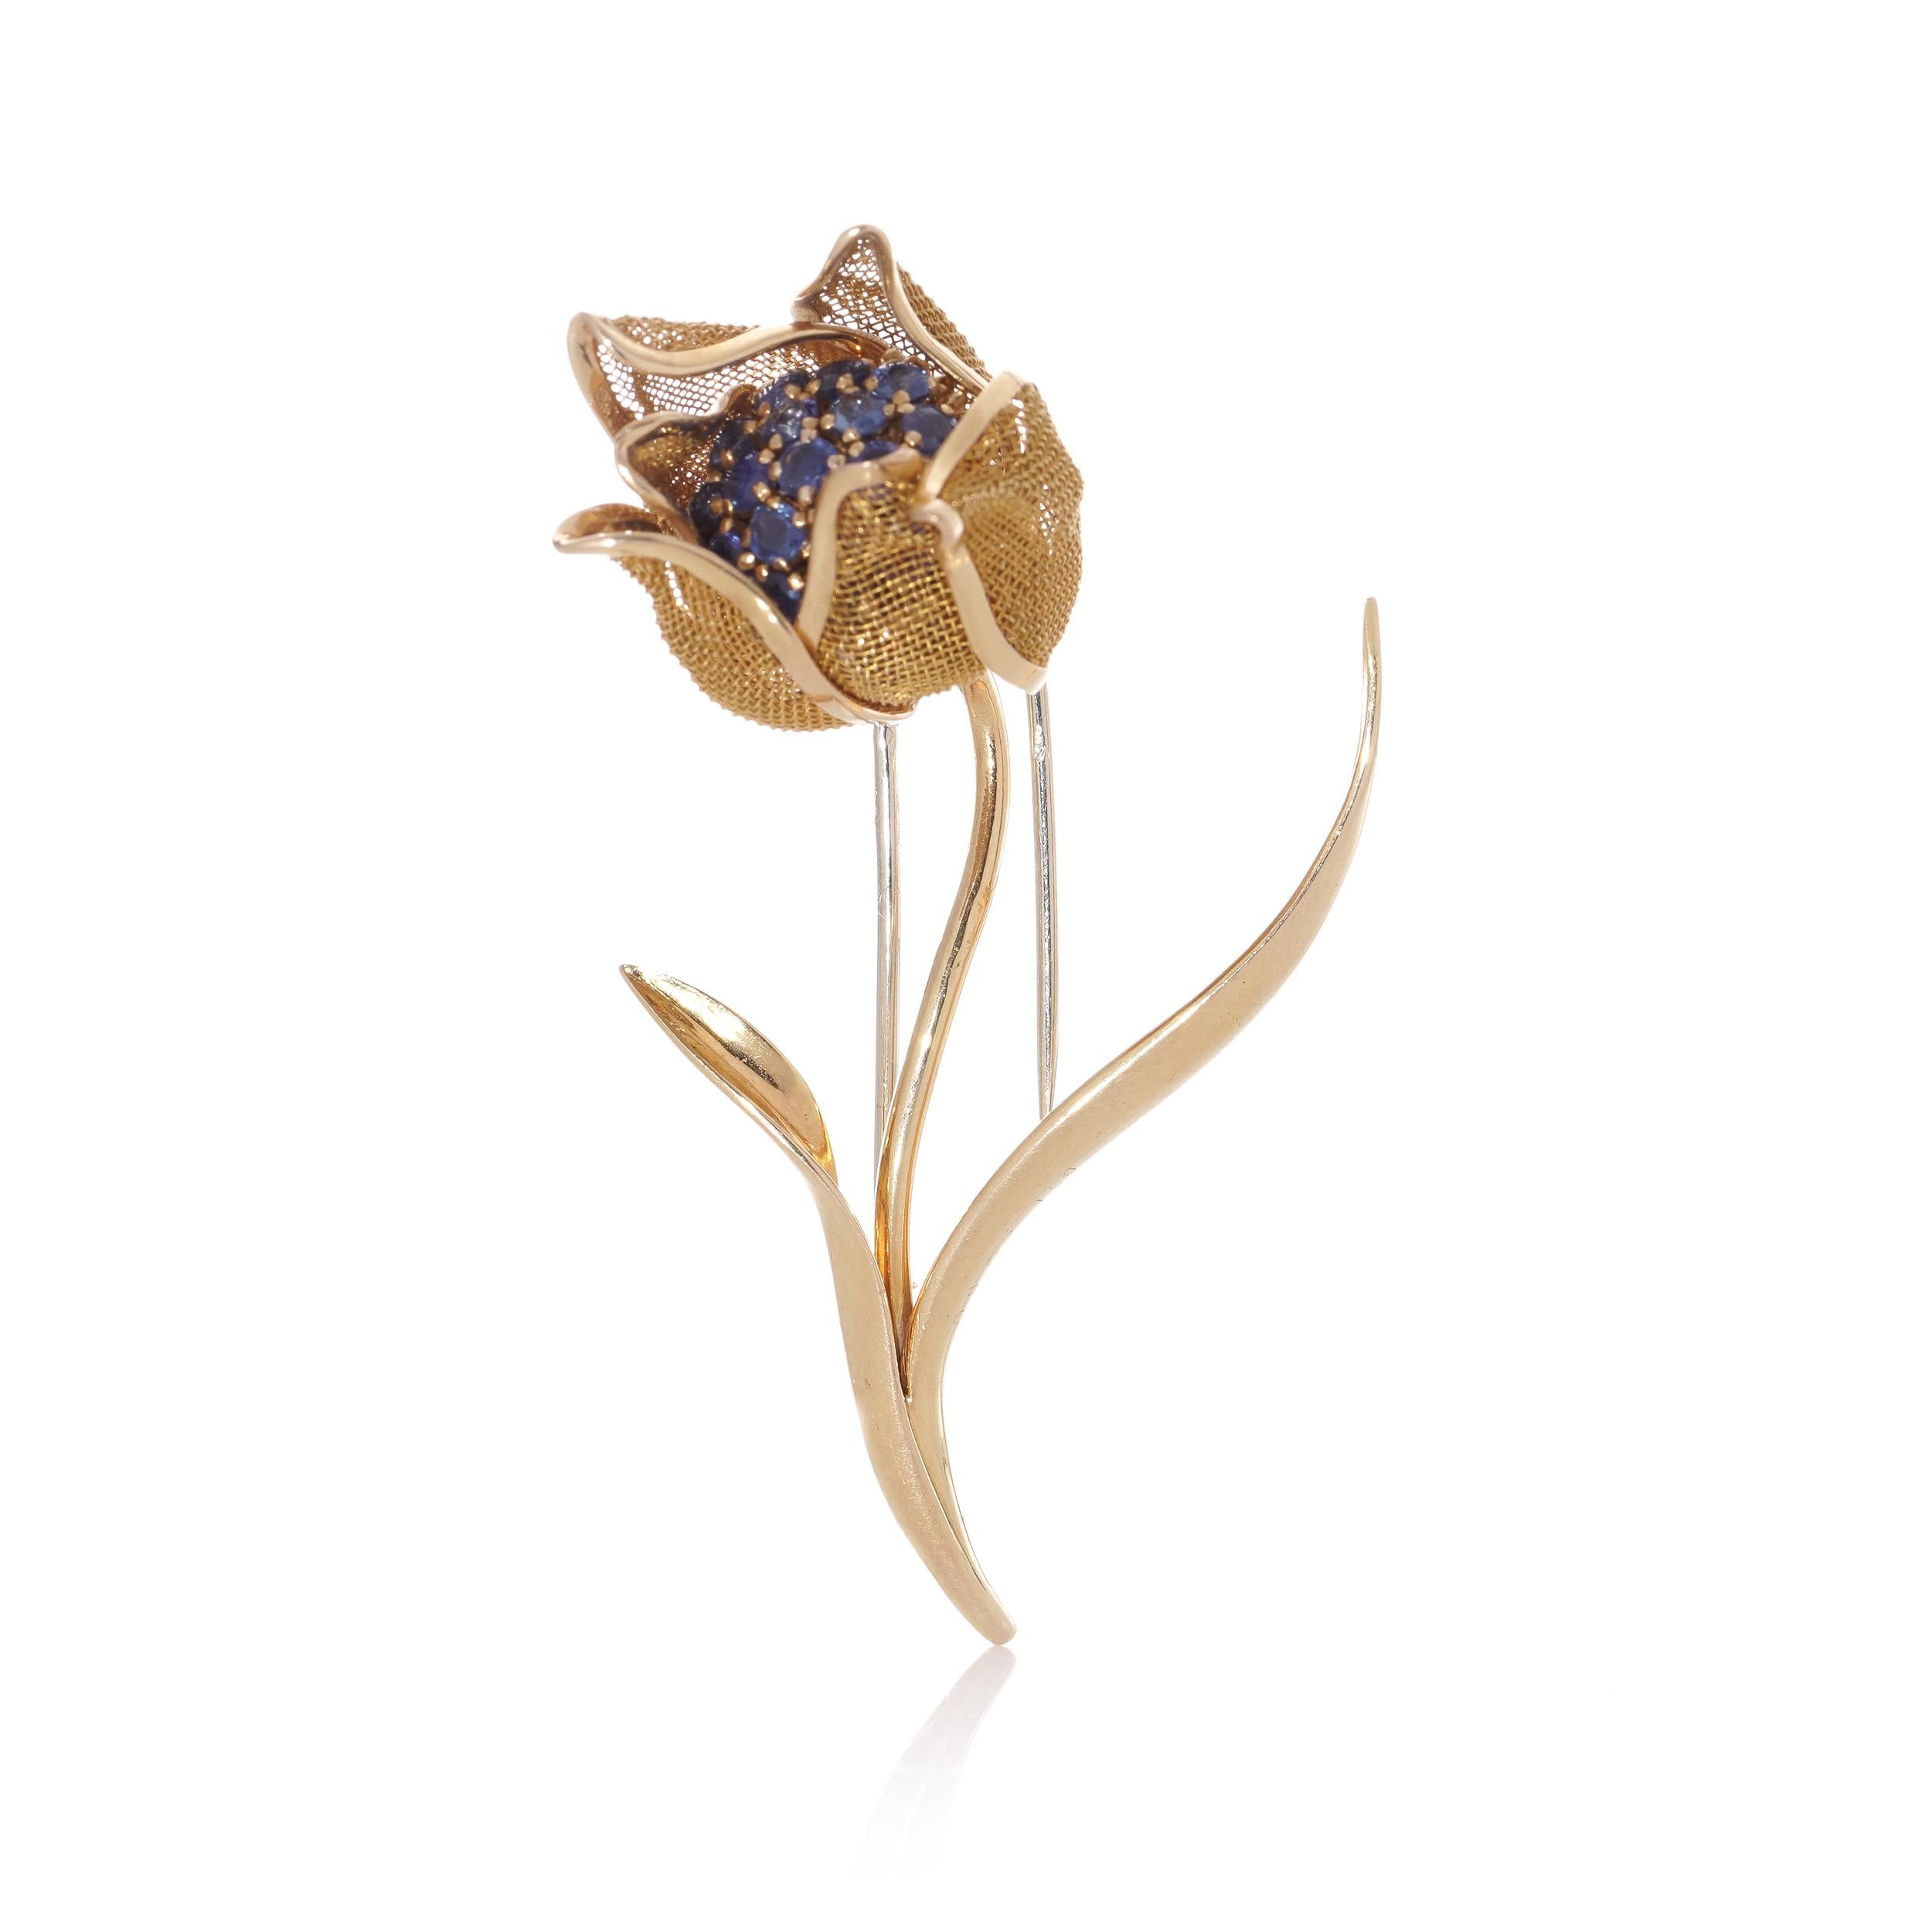 This exquisite brooch showcases a captivating floral design crafted from 18k yellow gold, featuring hinged mesh petals meticulously adorned with blue sapphires totaling an estimated weight of 1.52 carats. Originating from France circa the 1940s,